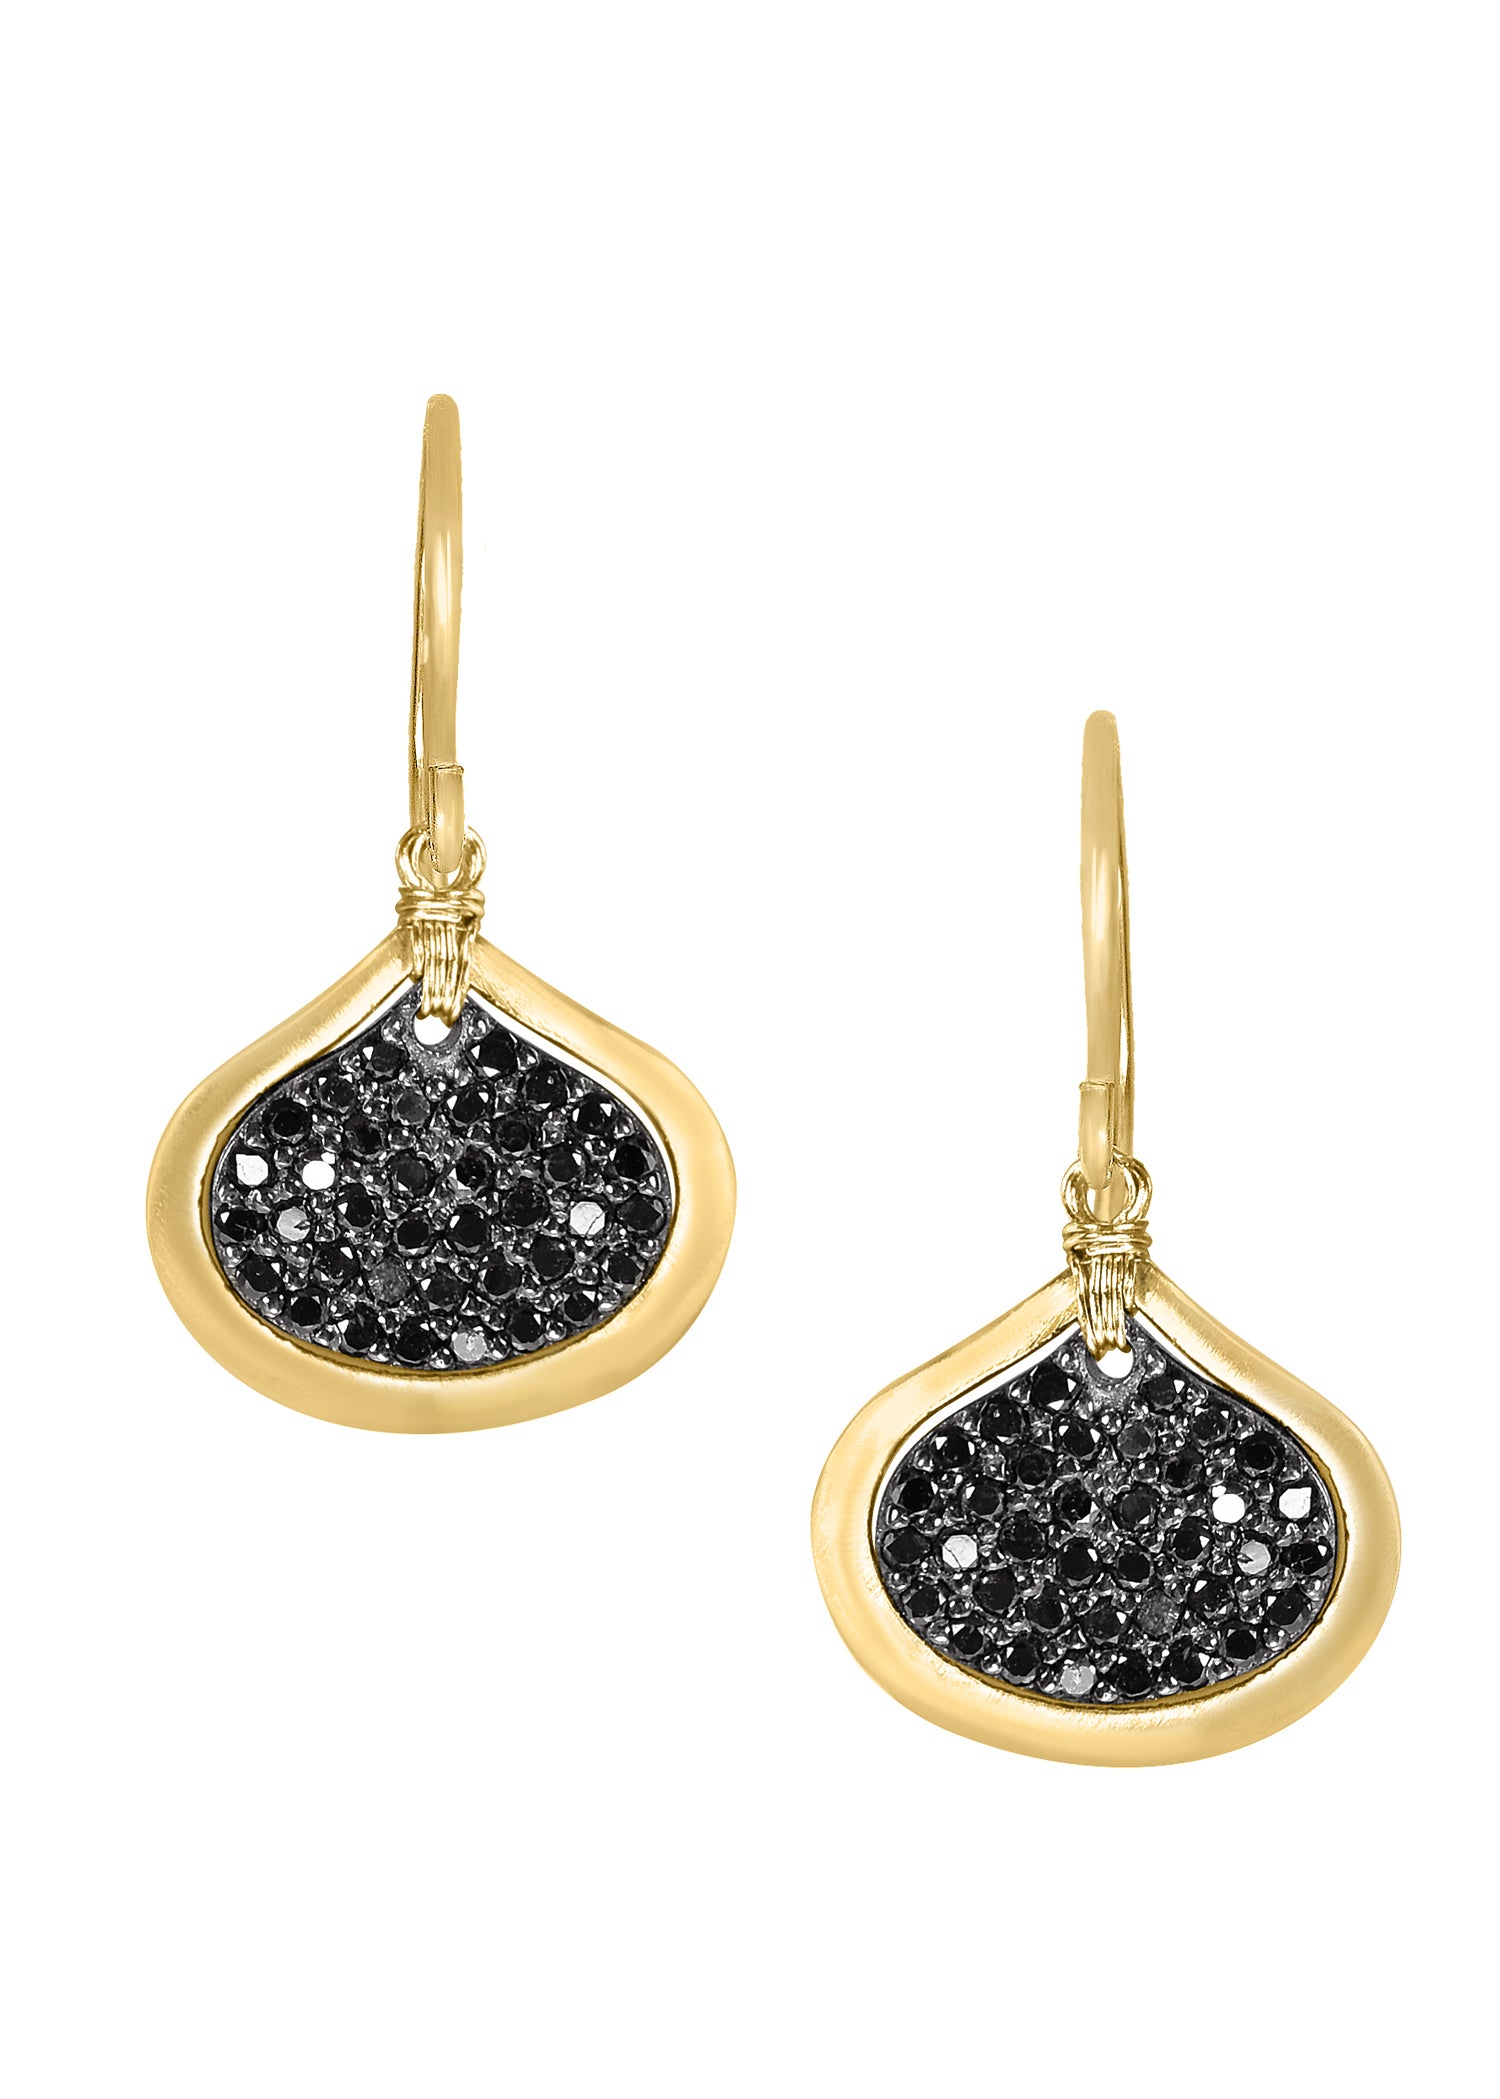 Black diamond 14k gold Special order only Earrings measure 7/8" in length (including the ear wires) and 1/2" in width at the widest point Handmade in our Los Angeles studio